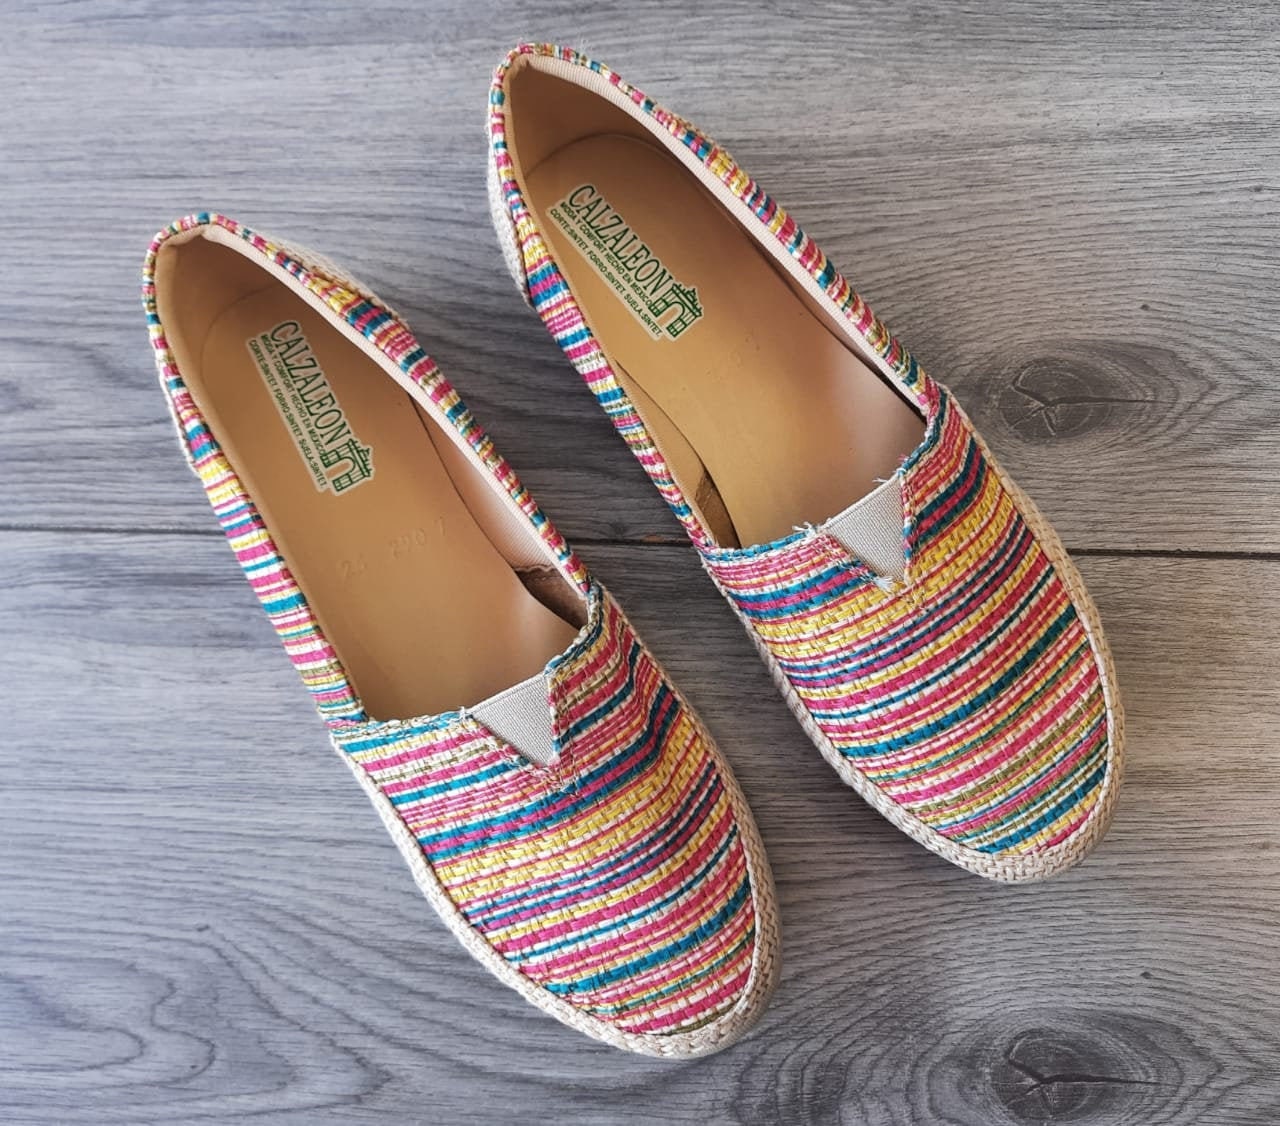 Women's espadrilles with Mexican stripe design | Etsy